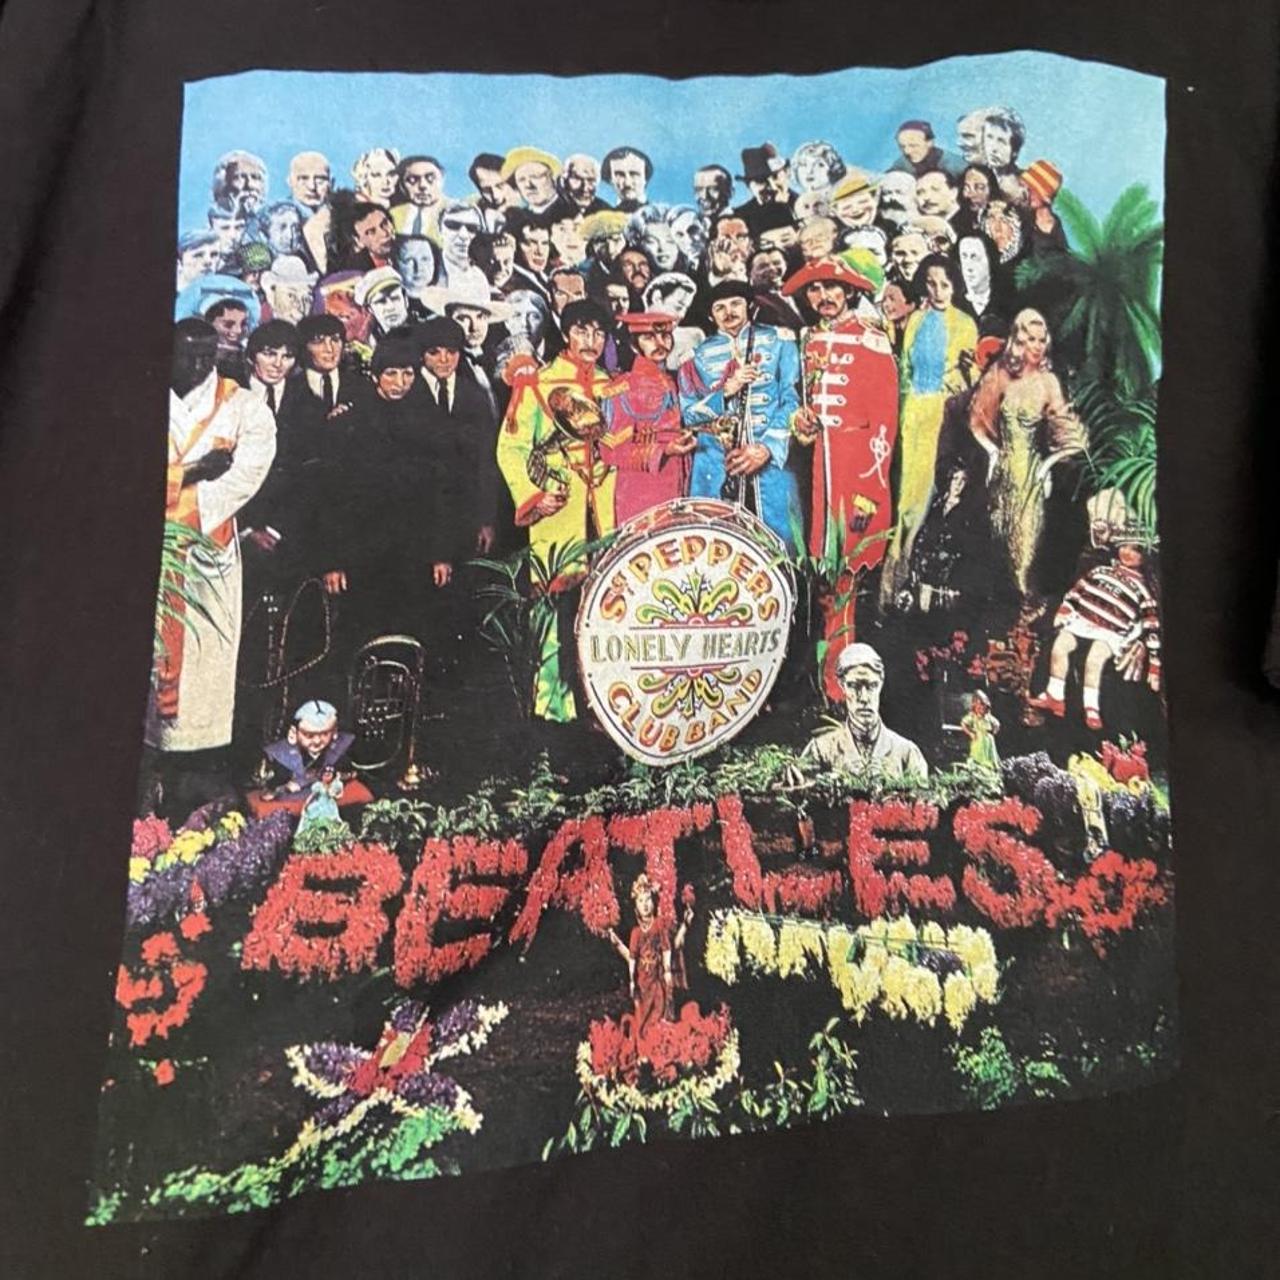 Product Image 2 - THE BEATLES SGT PEPPER SHIRT

🍁AWAY